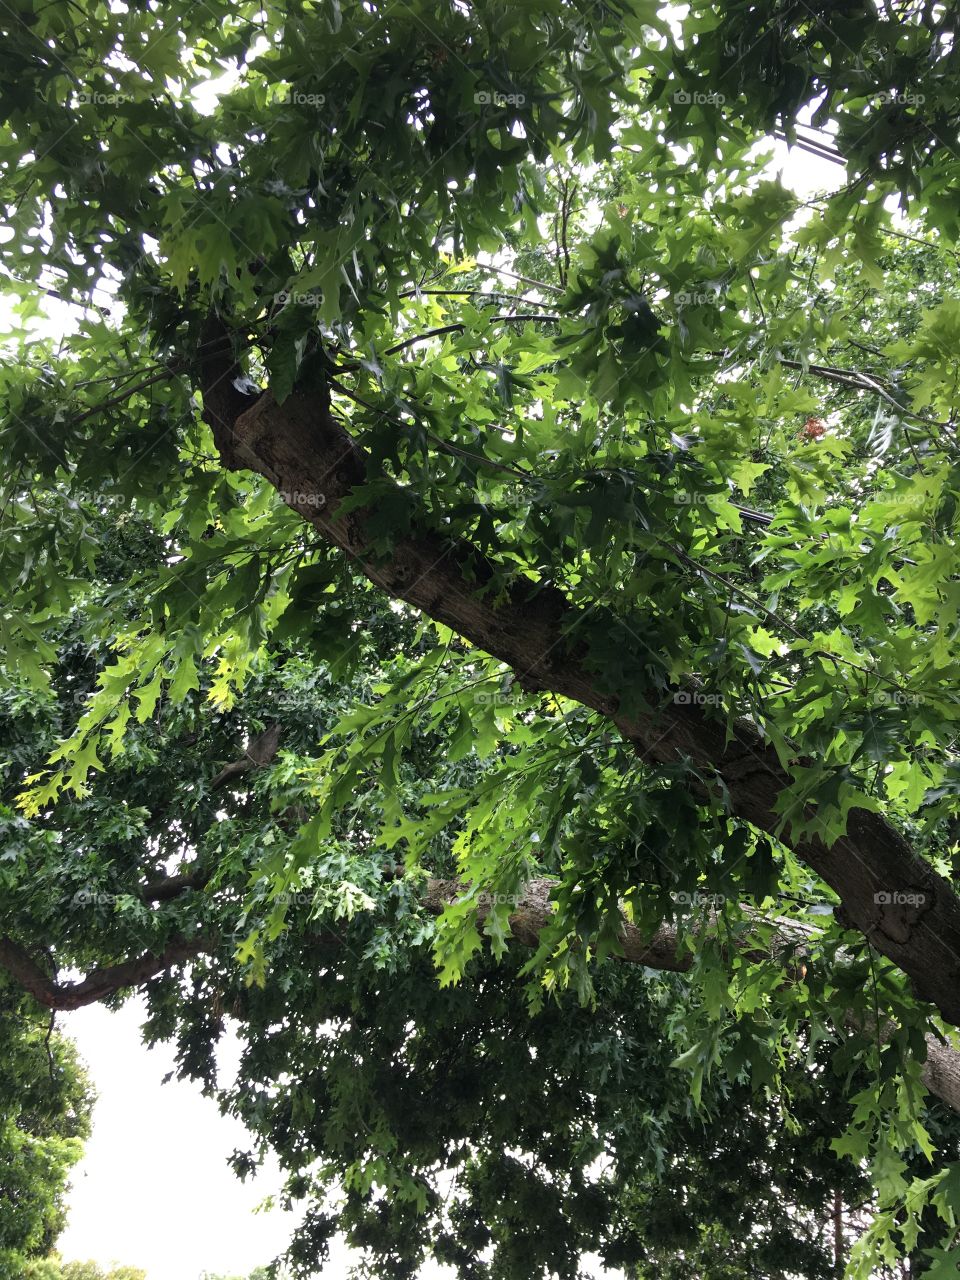 This amazing tree with beautiful green leaves is very appealing to the eye